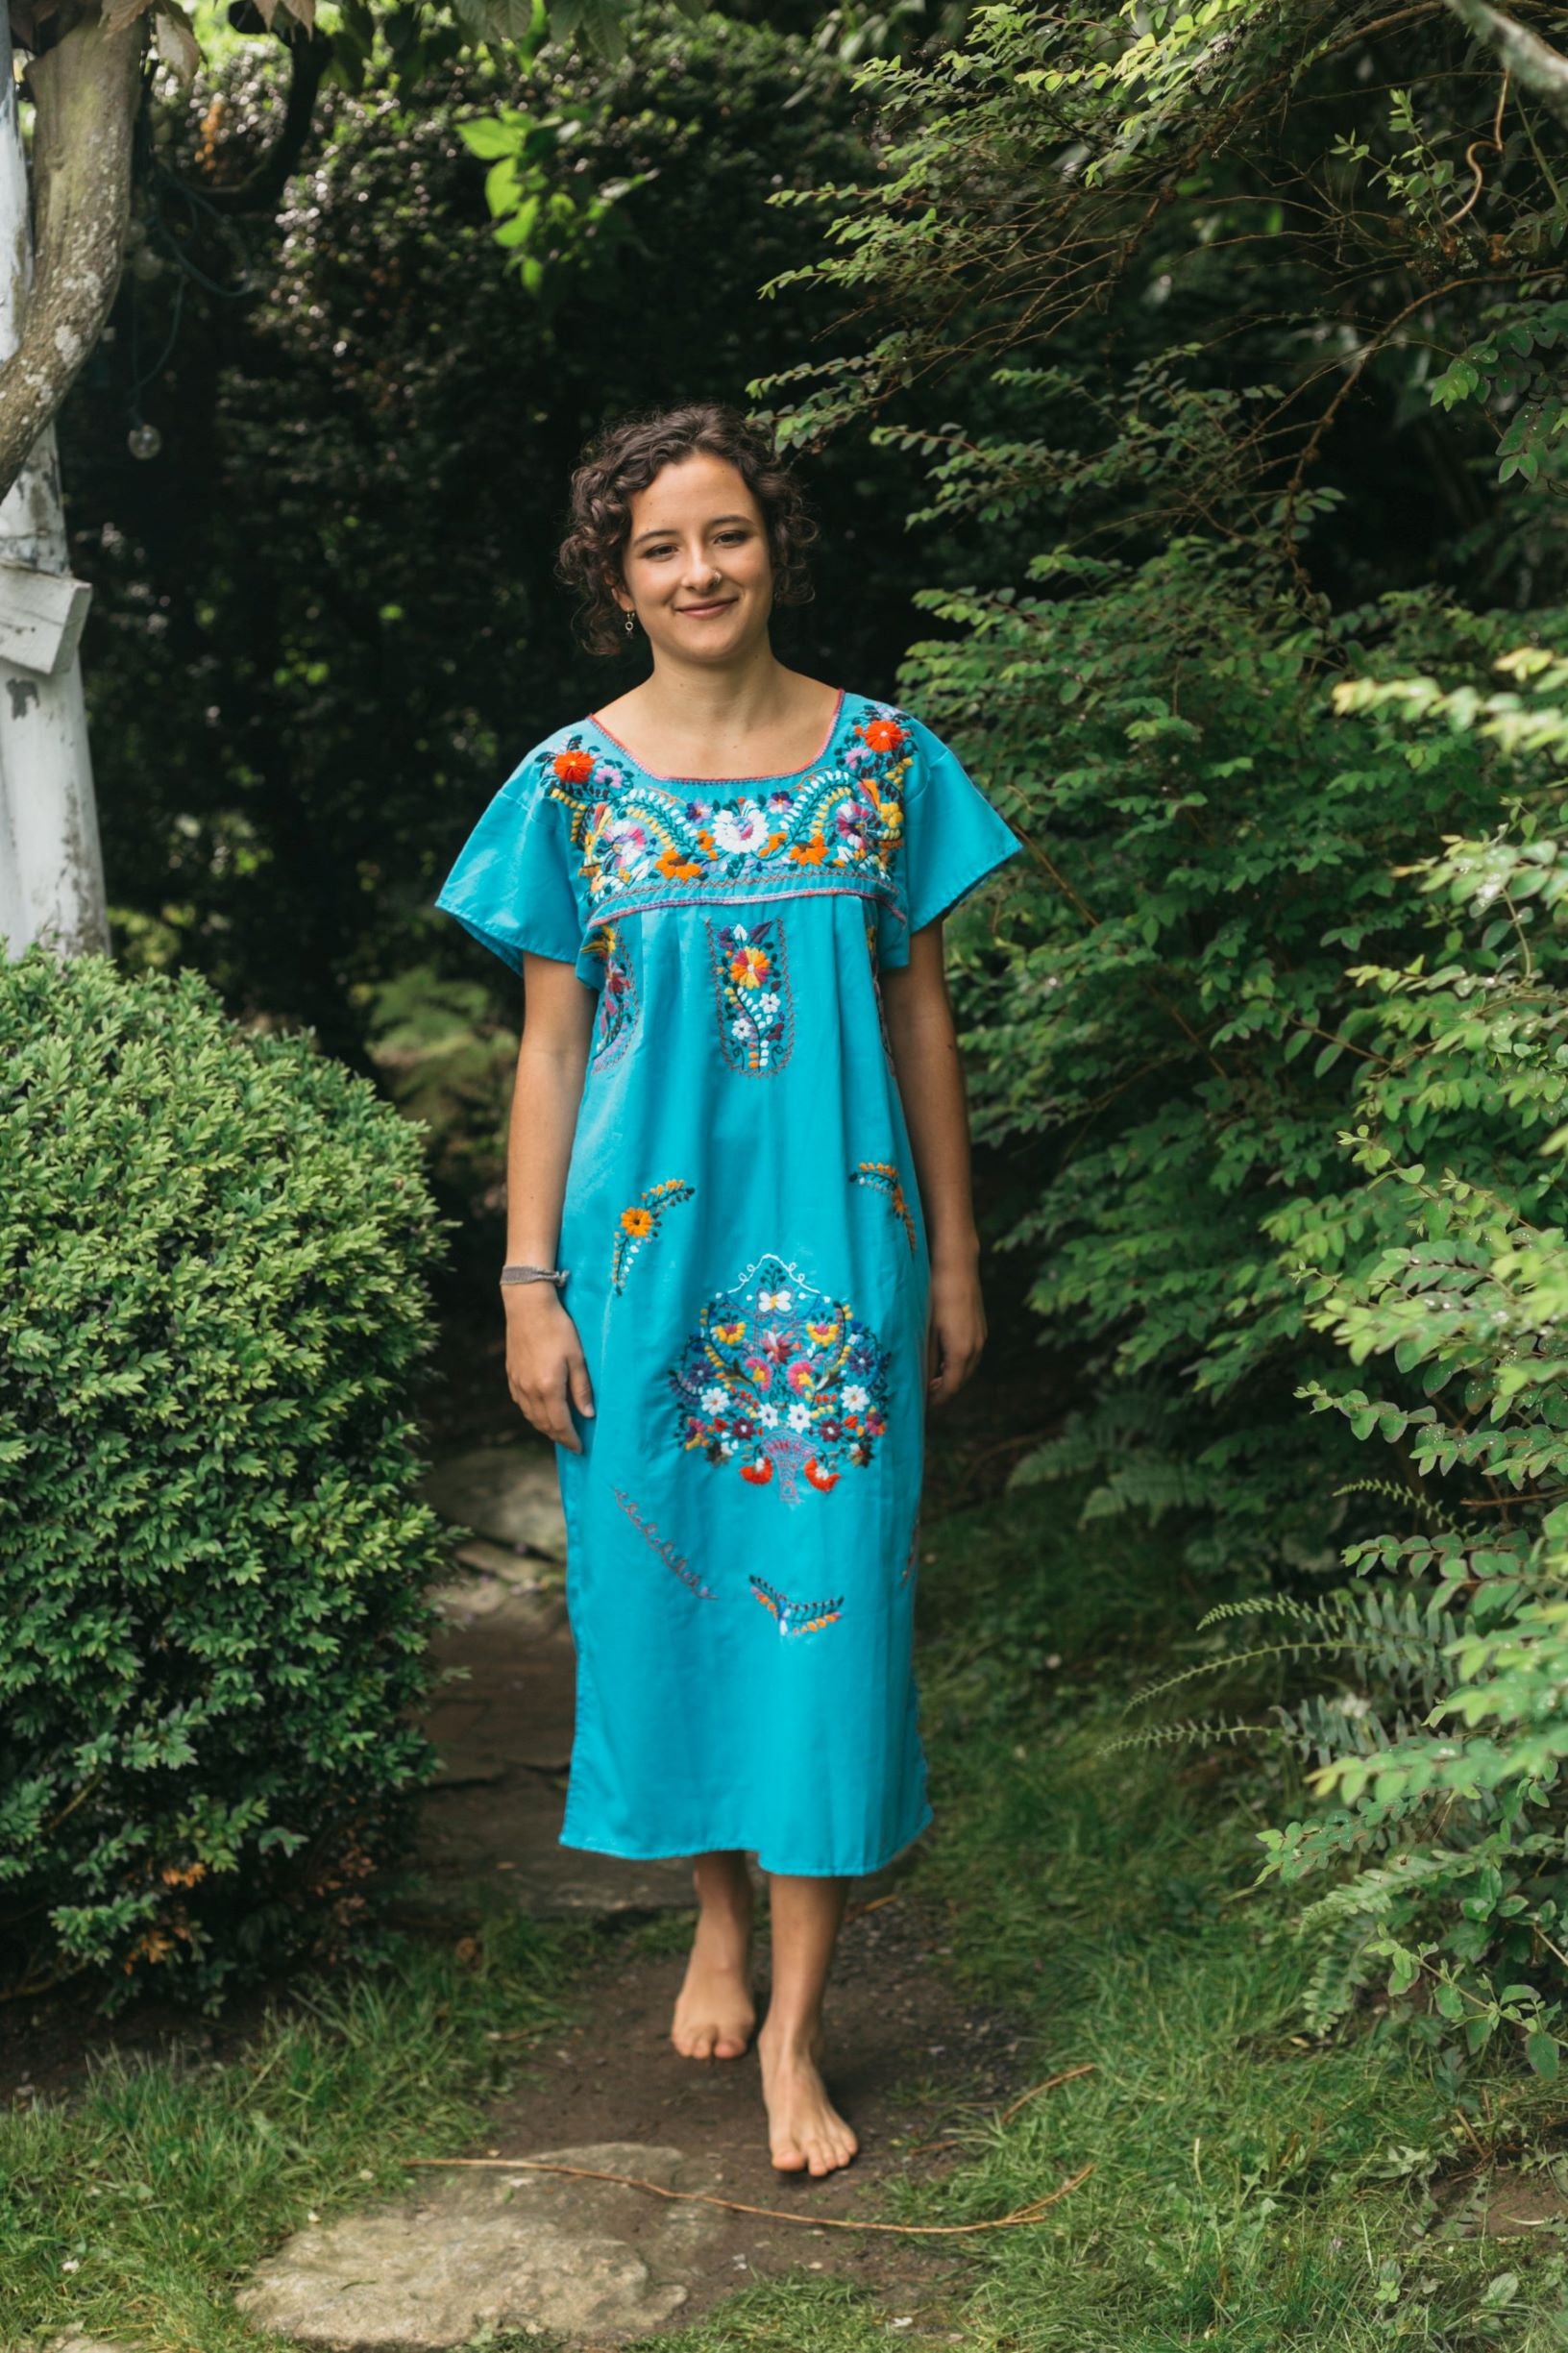 Photo of a young woman walking barefoot outdoors wearing a blue Old Mexico dress with colorful floral embroidery.